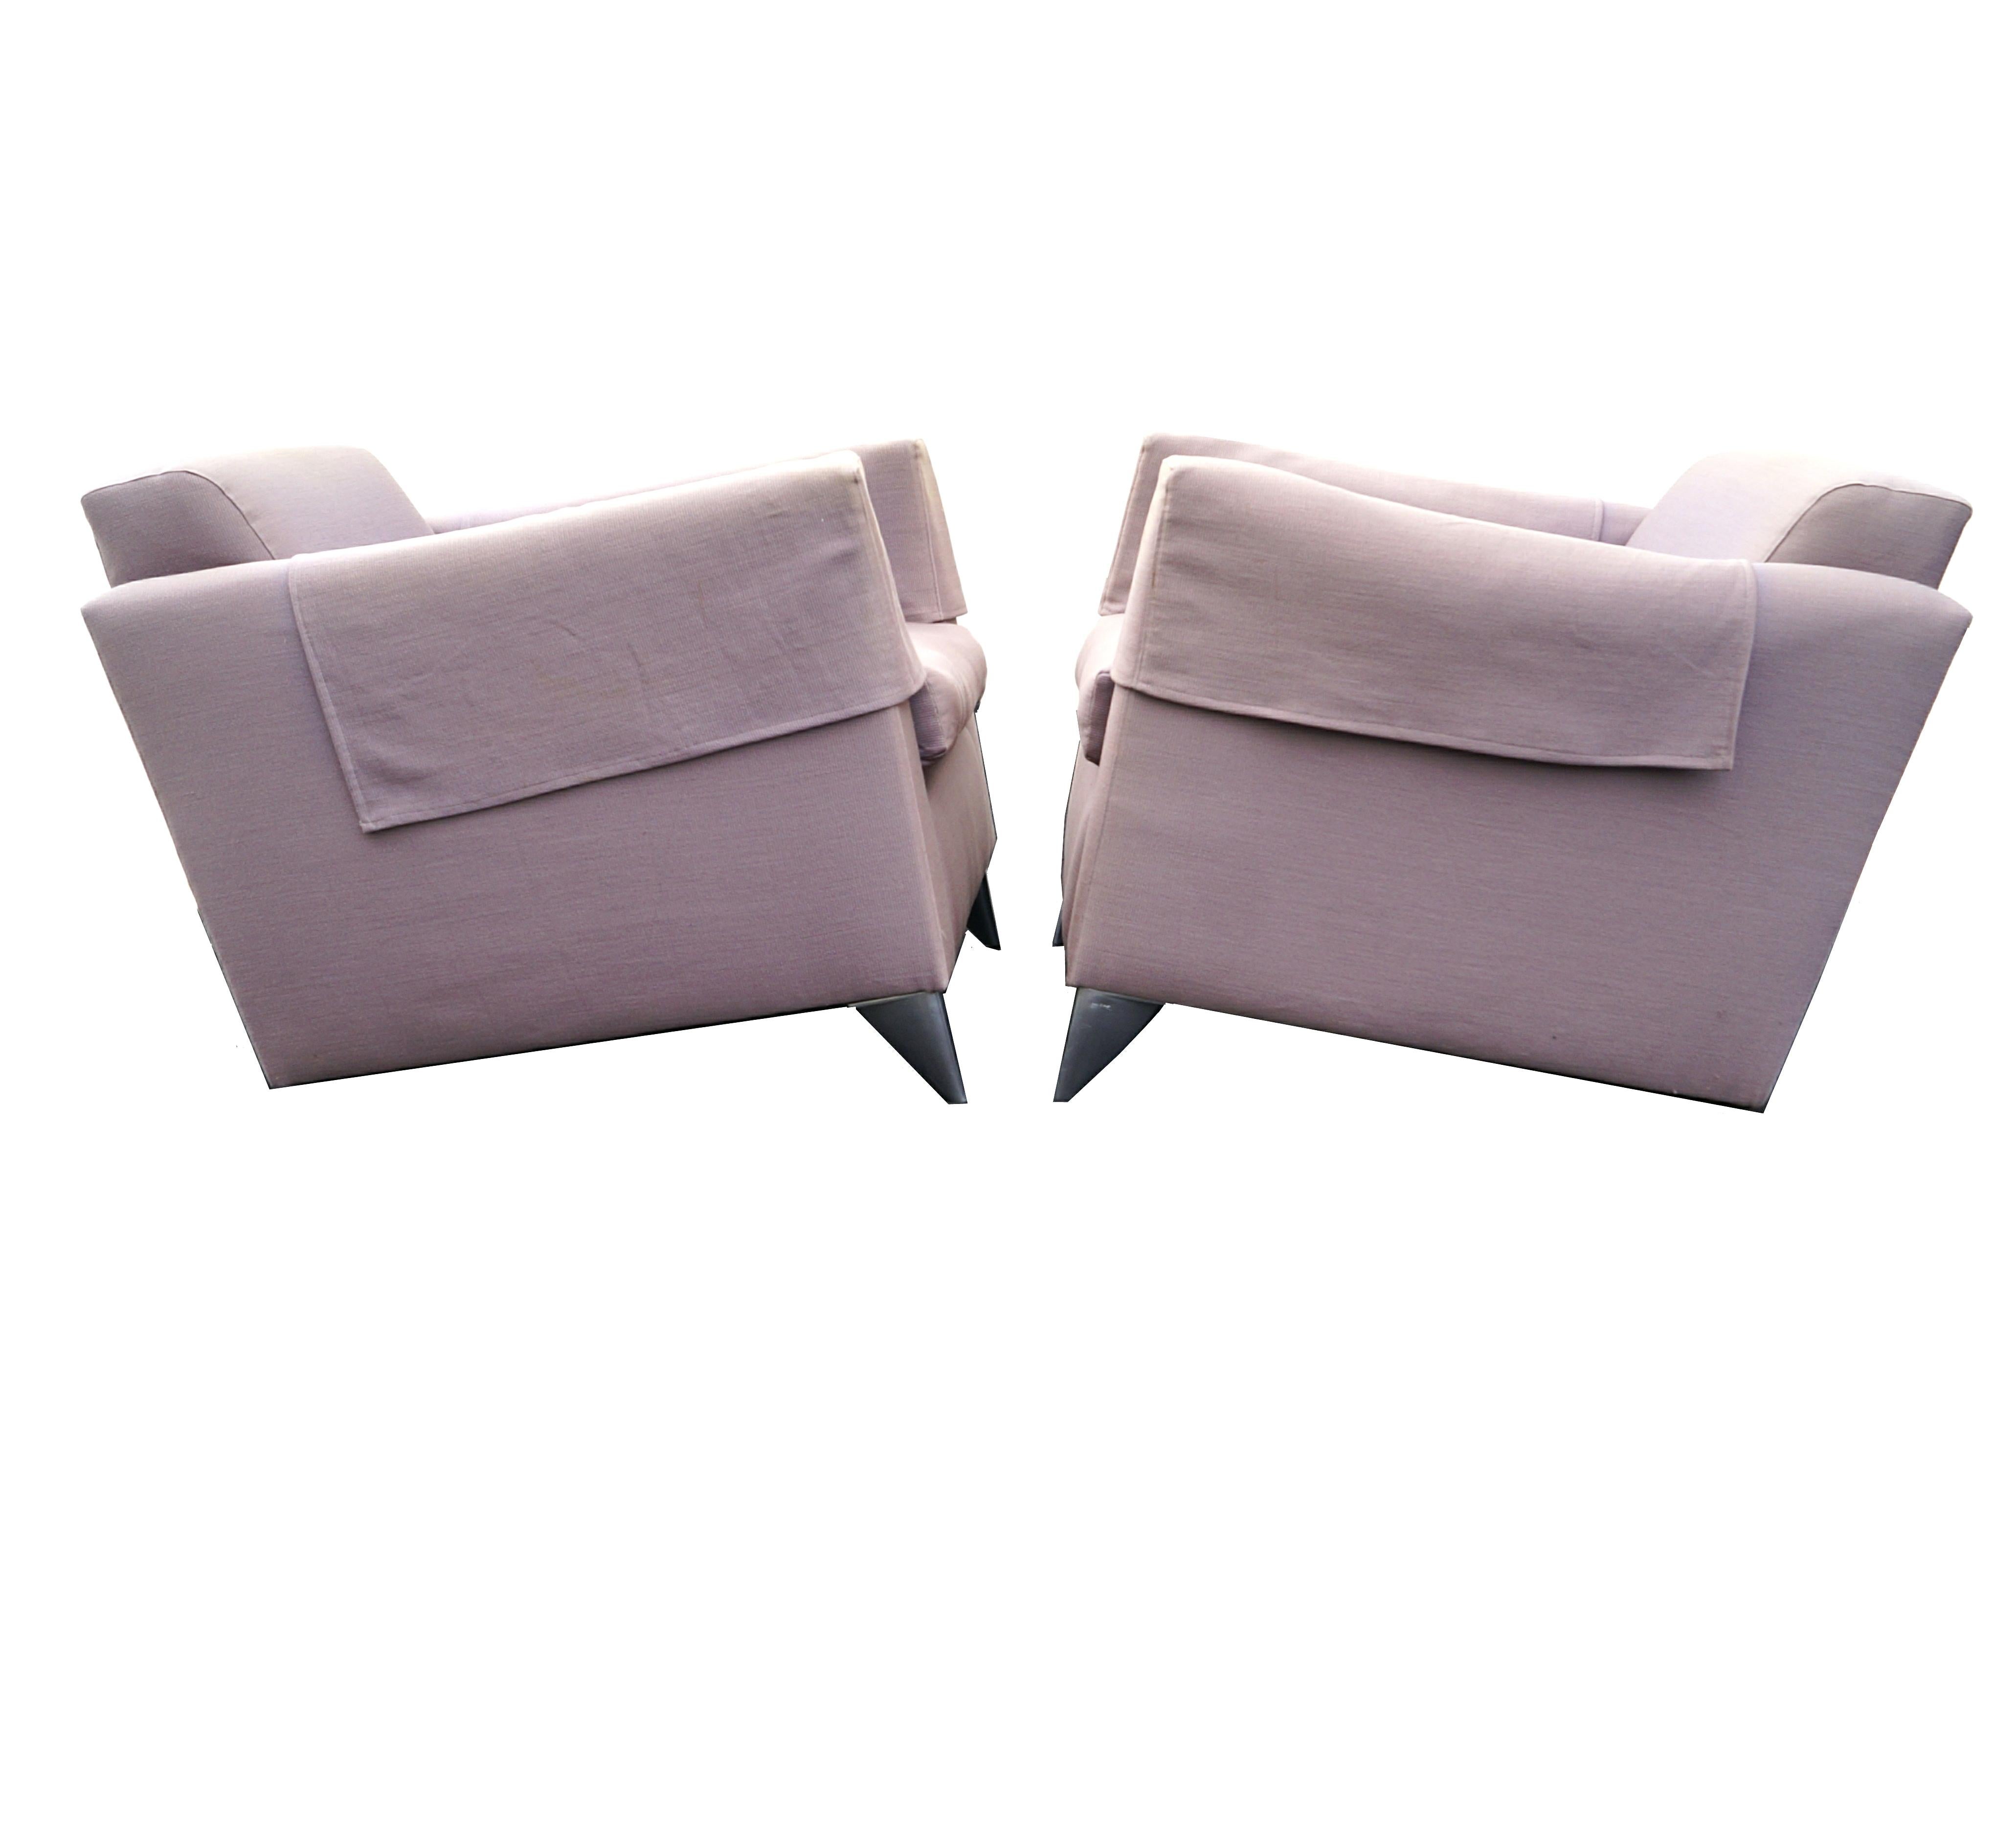 Late 20th Century Pair of Len Niggelman Lounge Club Slipper Chairs by Philippe Starck